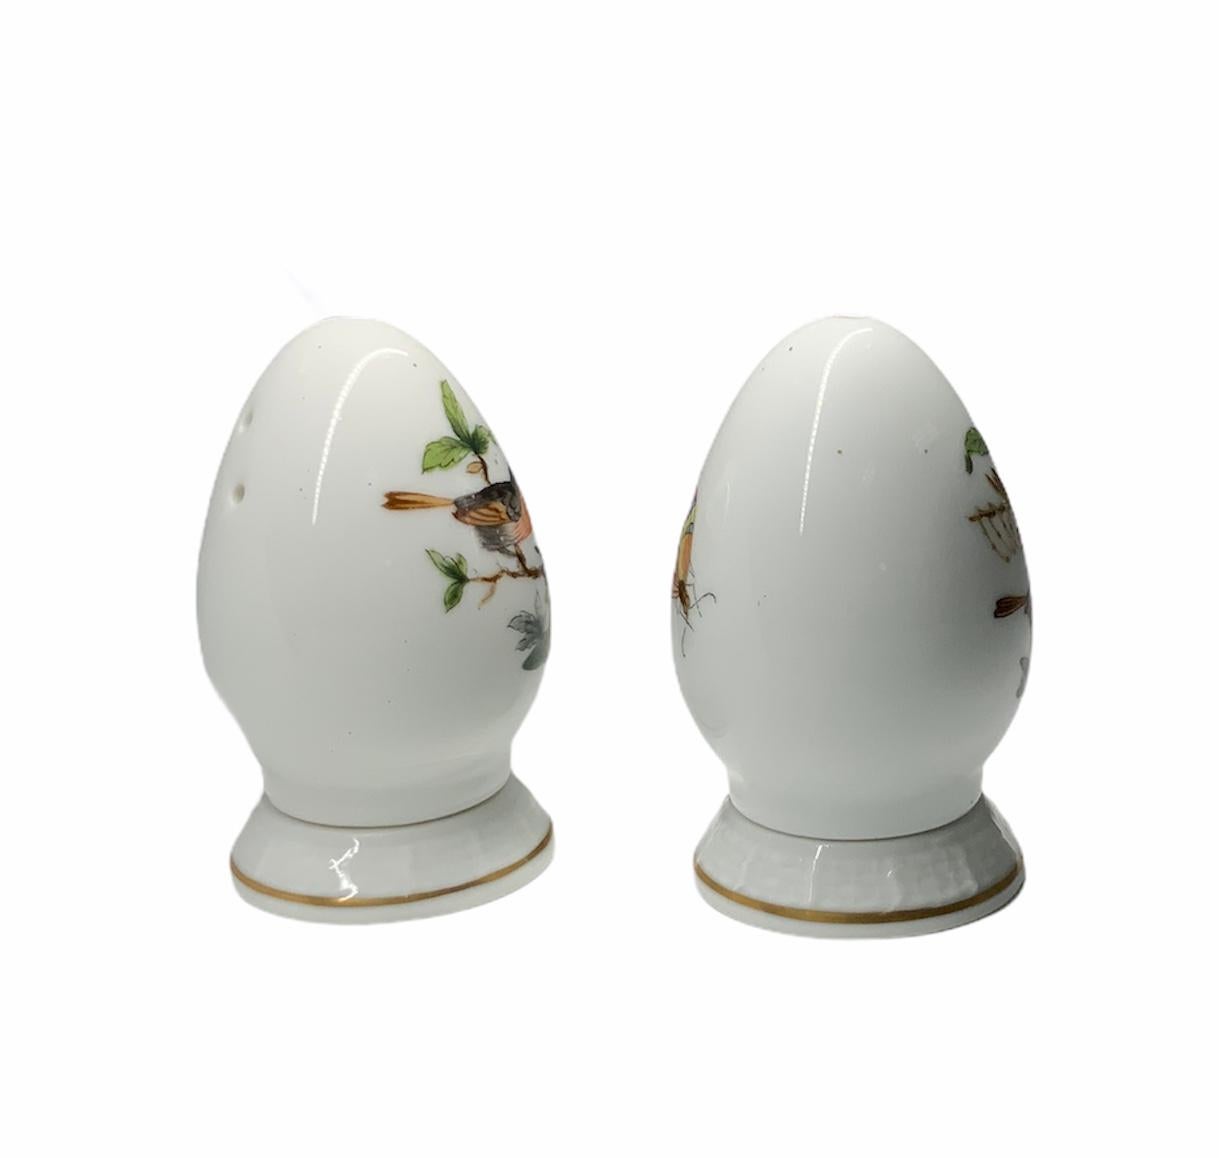 Hungarian Herend Rothschild Hand Painted Porcelain Pair of Salt and Pepper Shakers